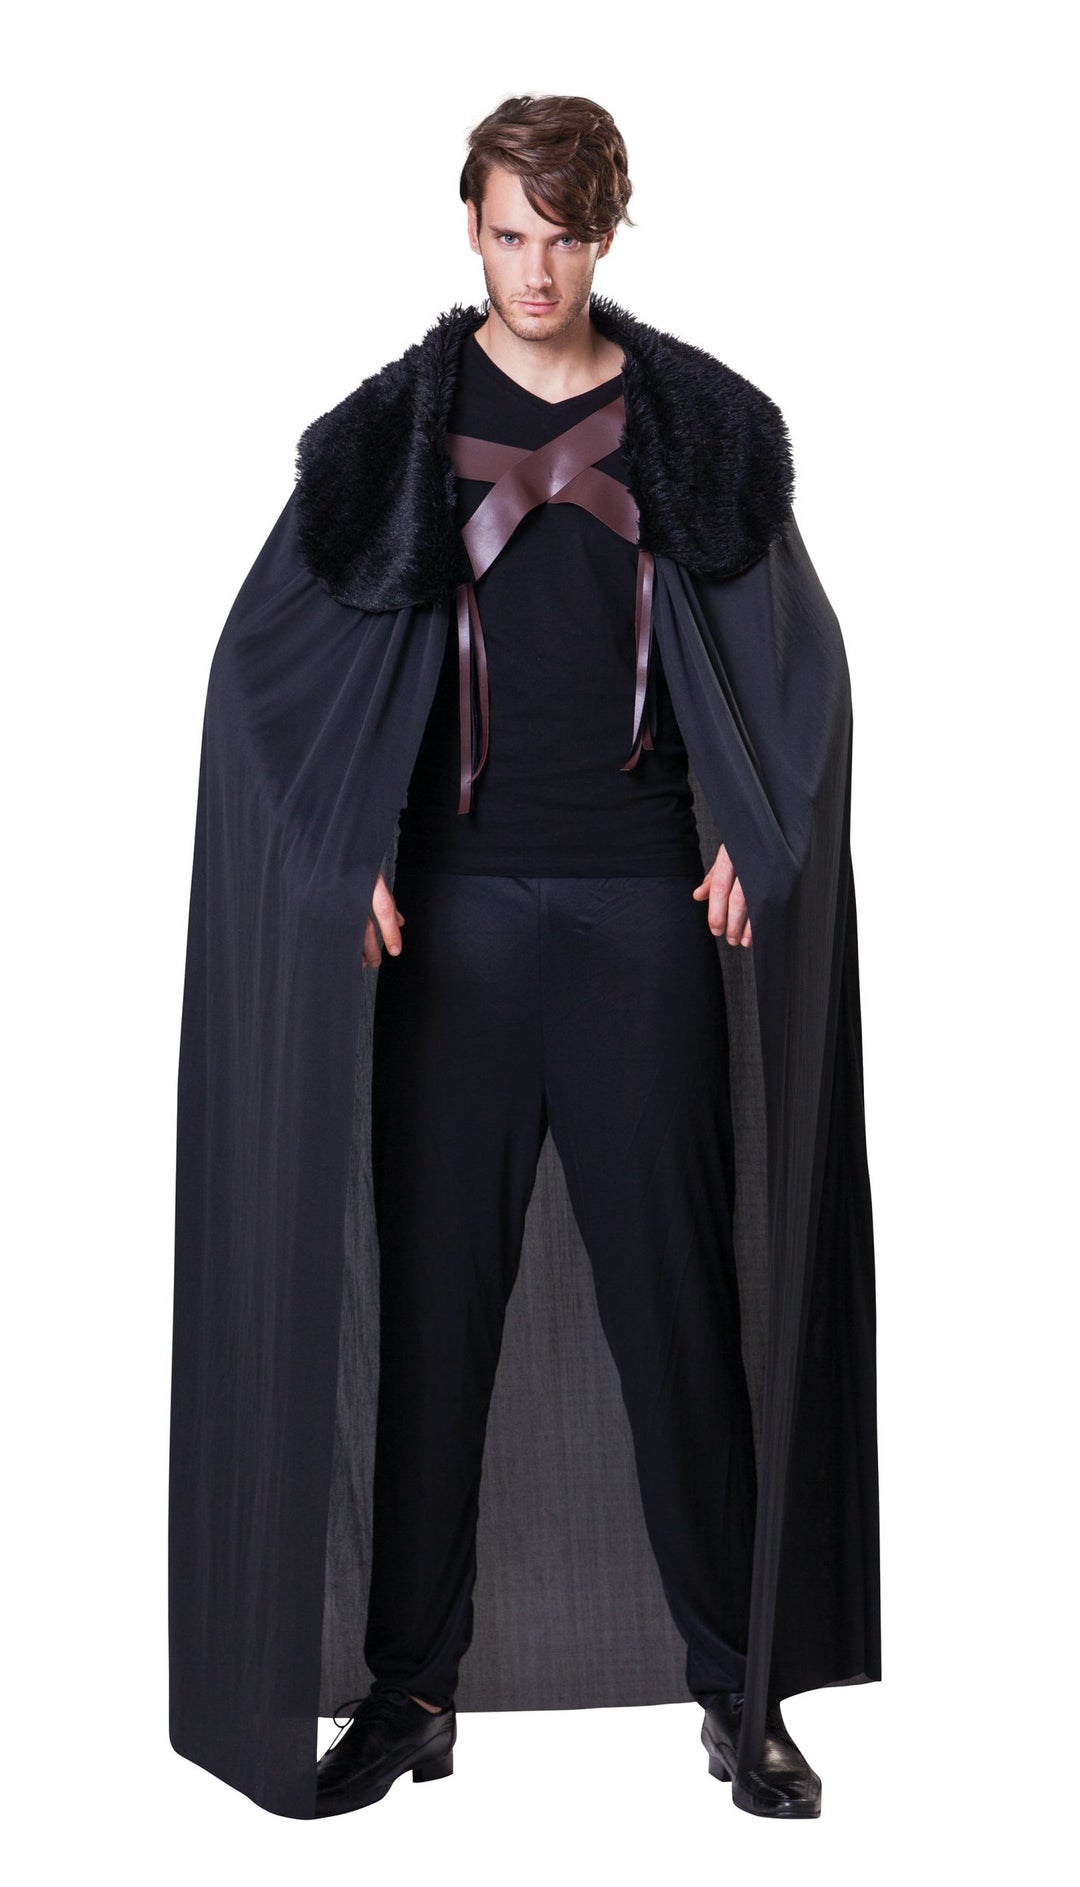 Cape Mens Hooded Black With Collar Adult Costume Male_1 AC061